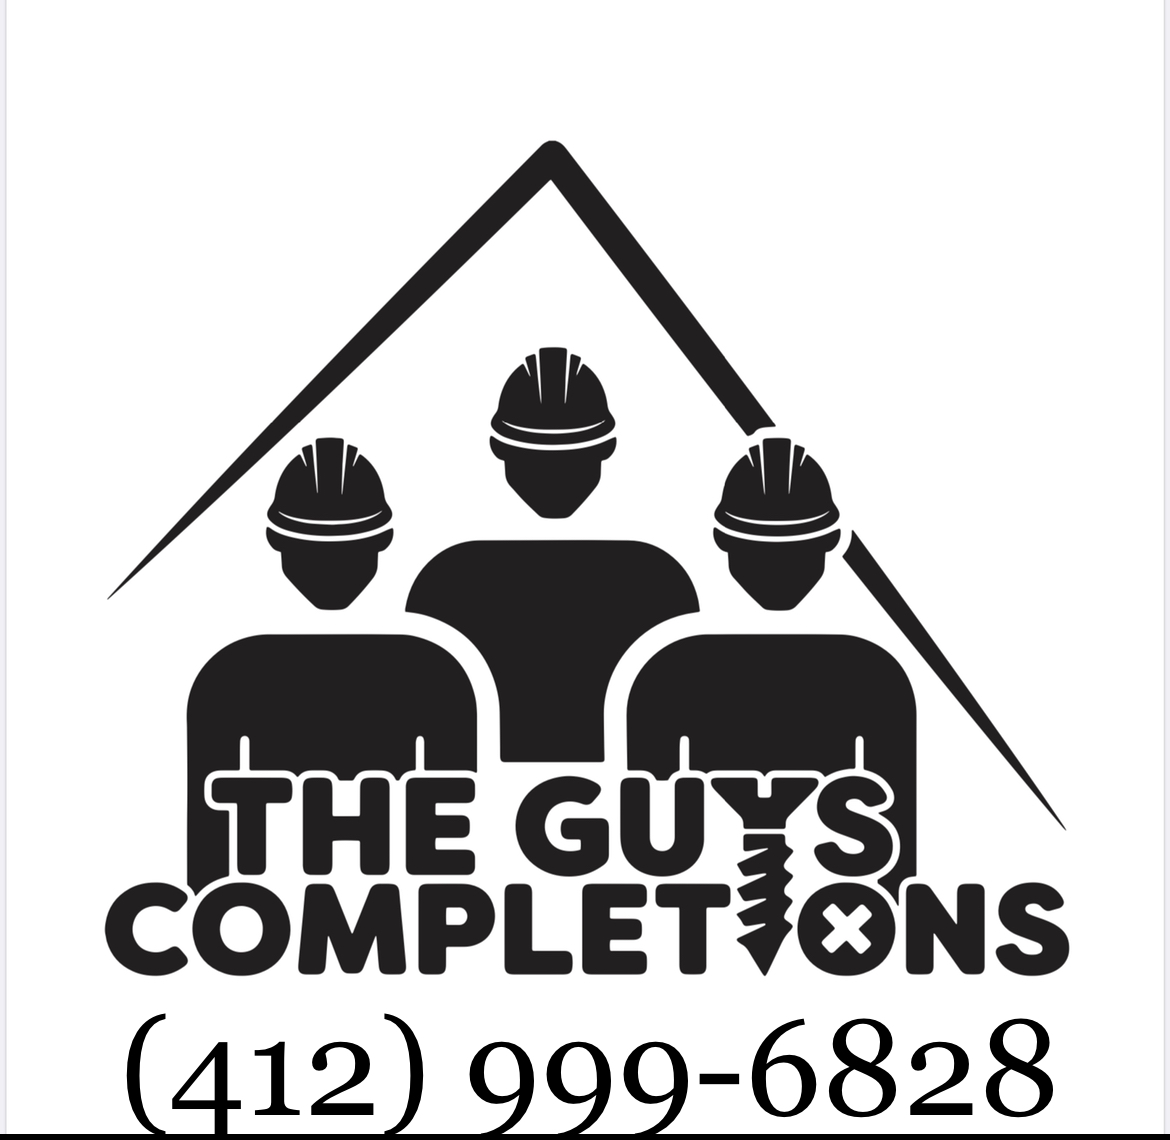 The Guys Completions LLC Logo